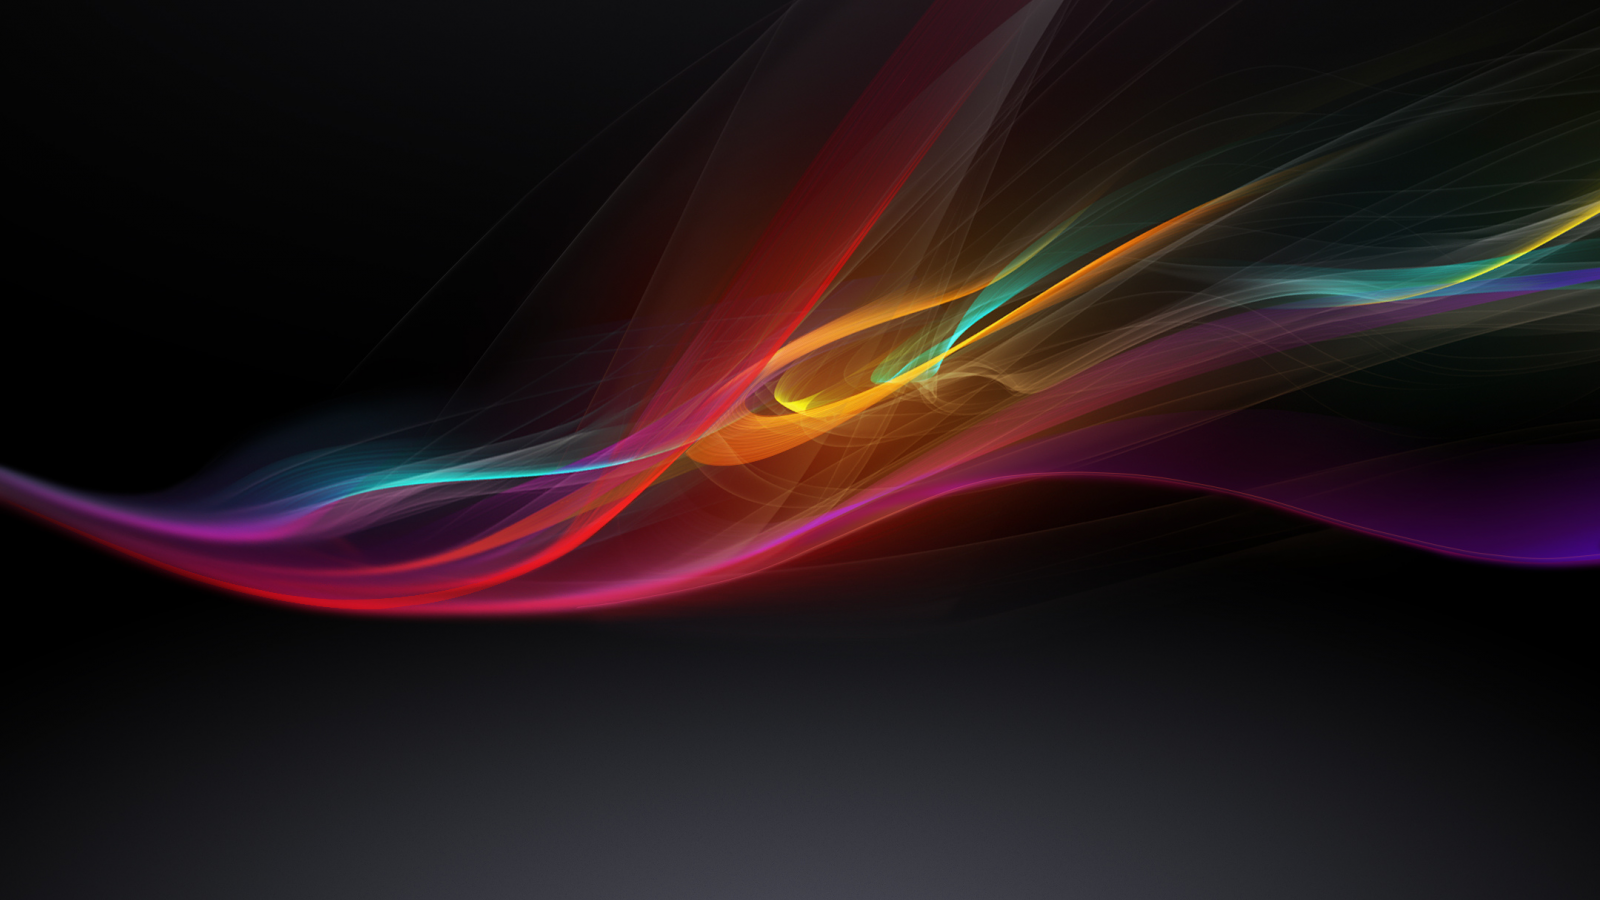 official, xperia, Sony, wallpaper, z